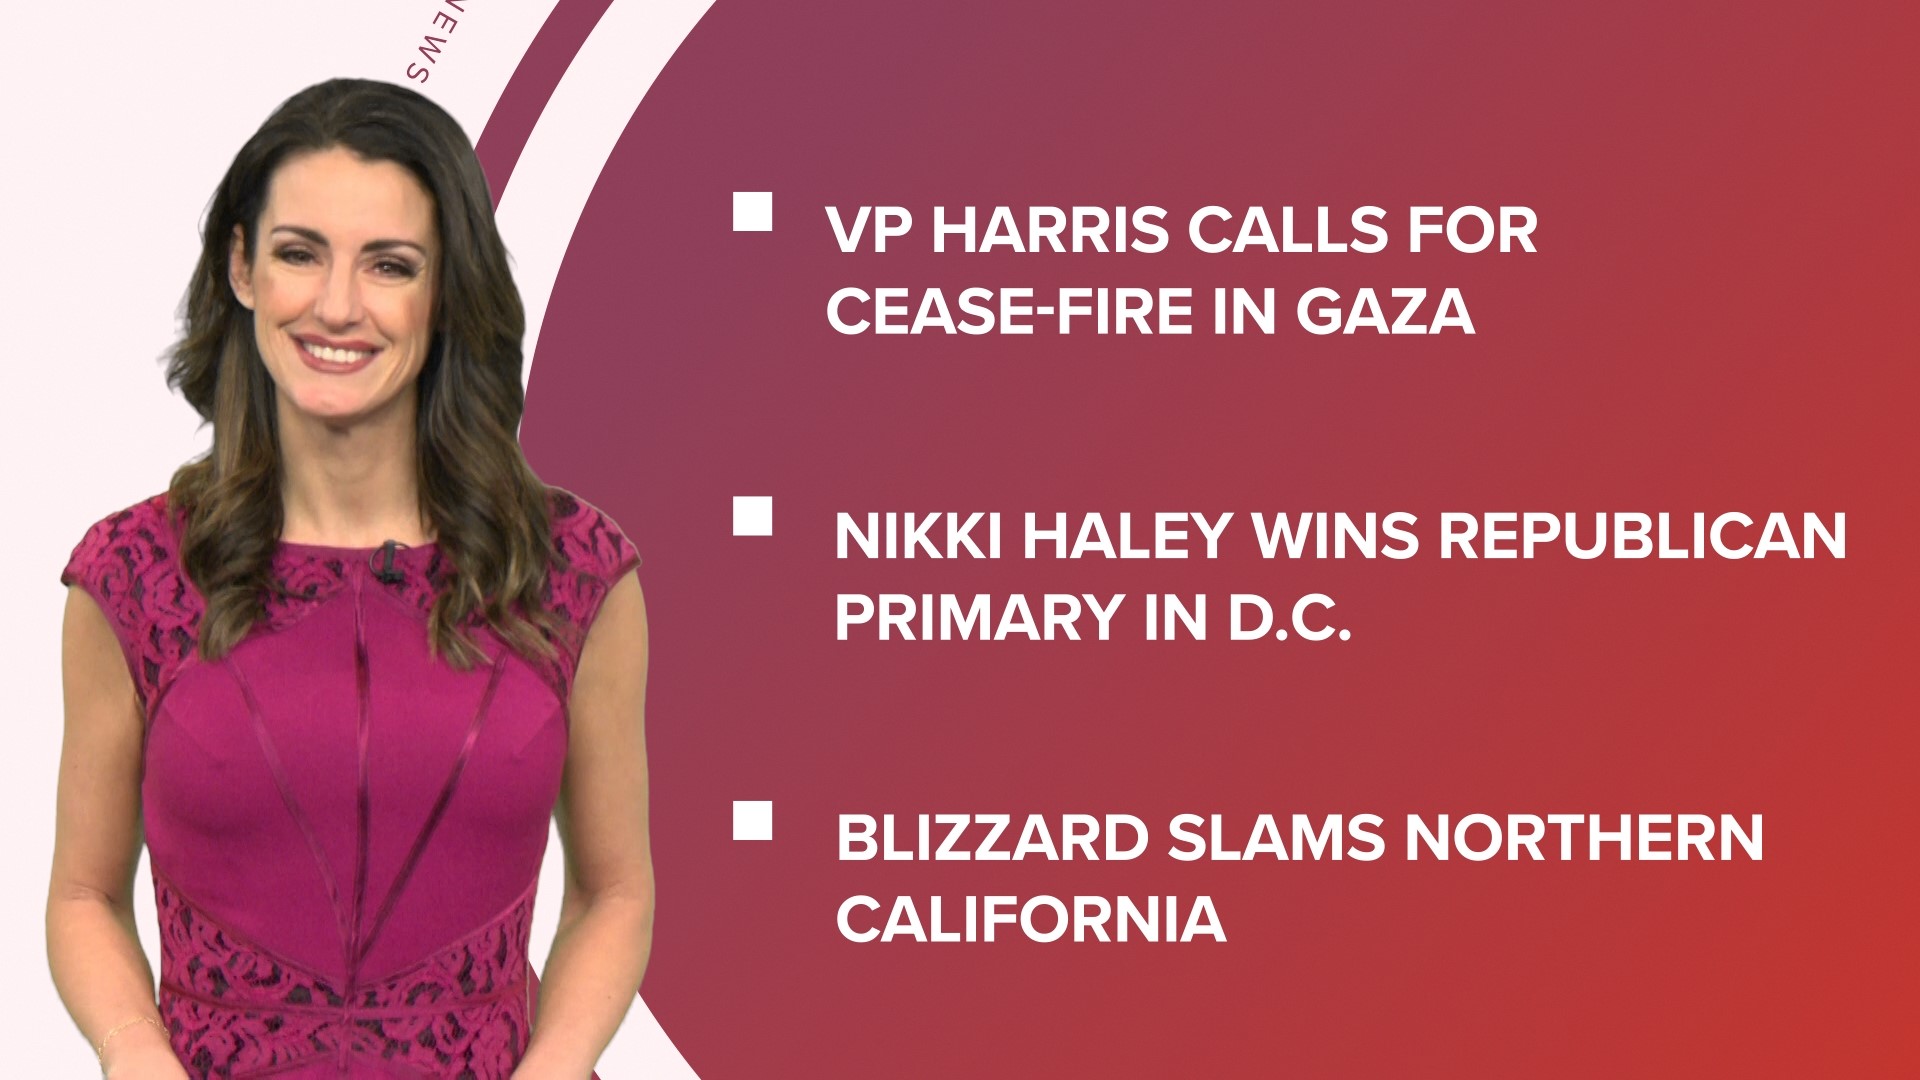 A look at what is happening in the news from VP Kamala Harris calling for a cease-fire in Gaza to Nikki Haley winning the primary in D.C. and a soup dumpling recall.